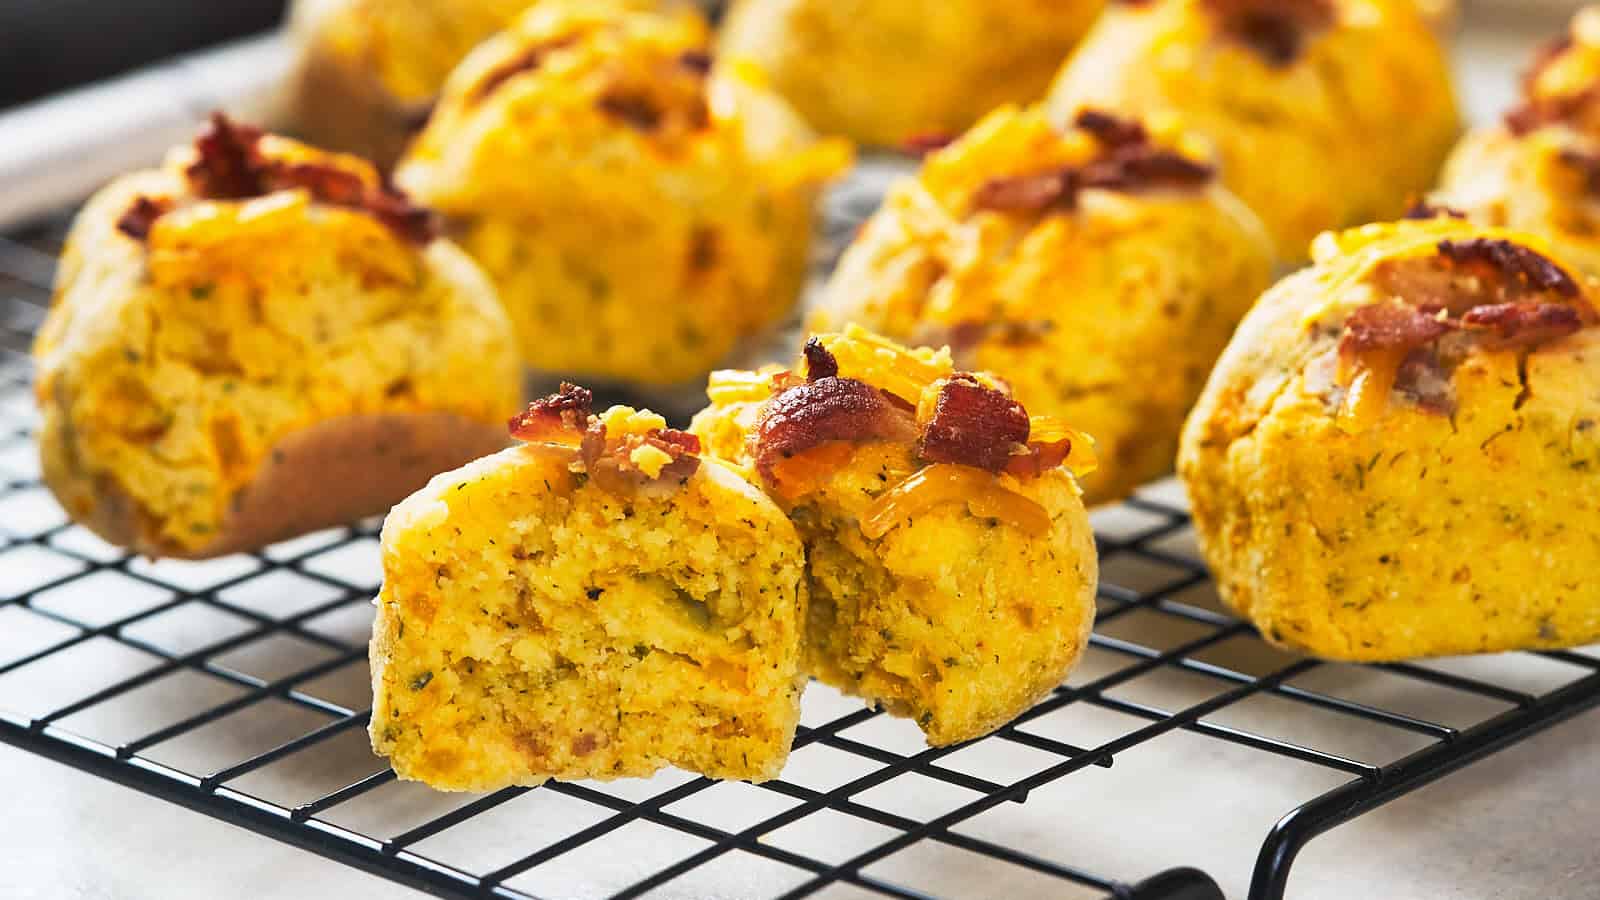 A hand scooping a serving of baked cheesy bread rolls topped with bacon from a rectangular dish.